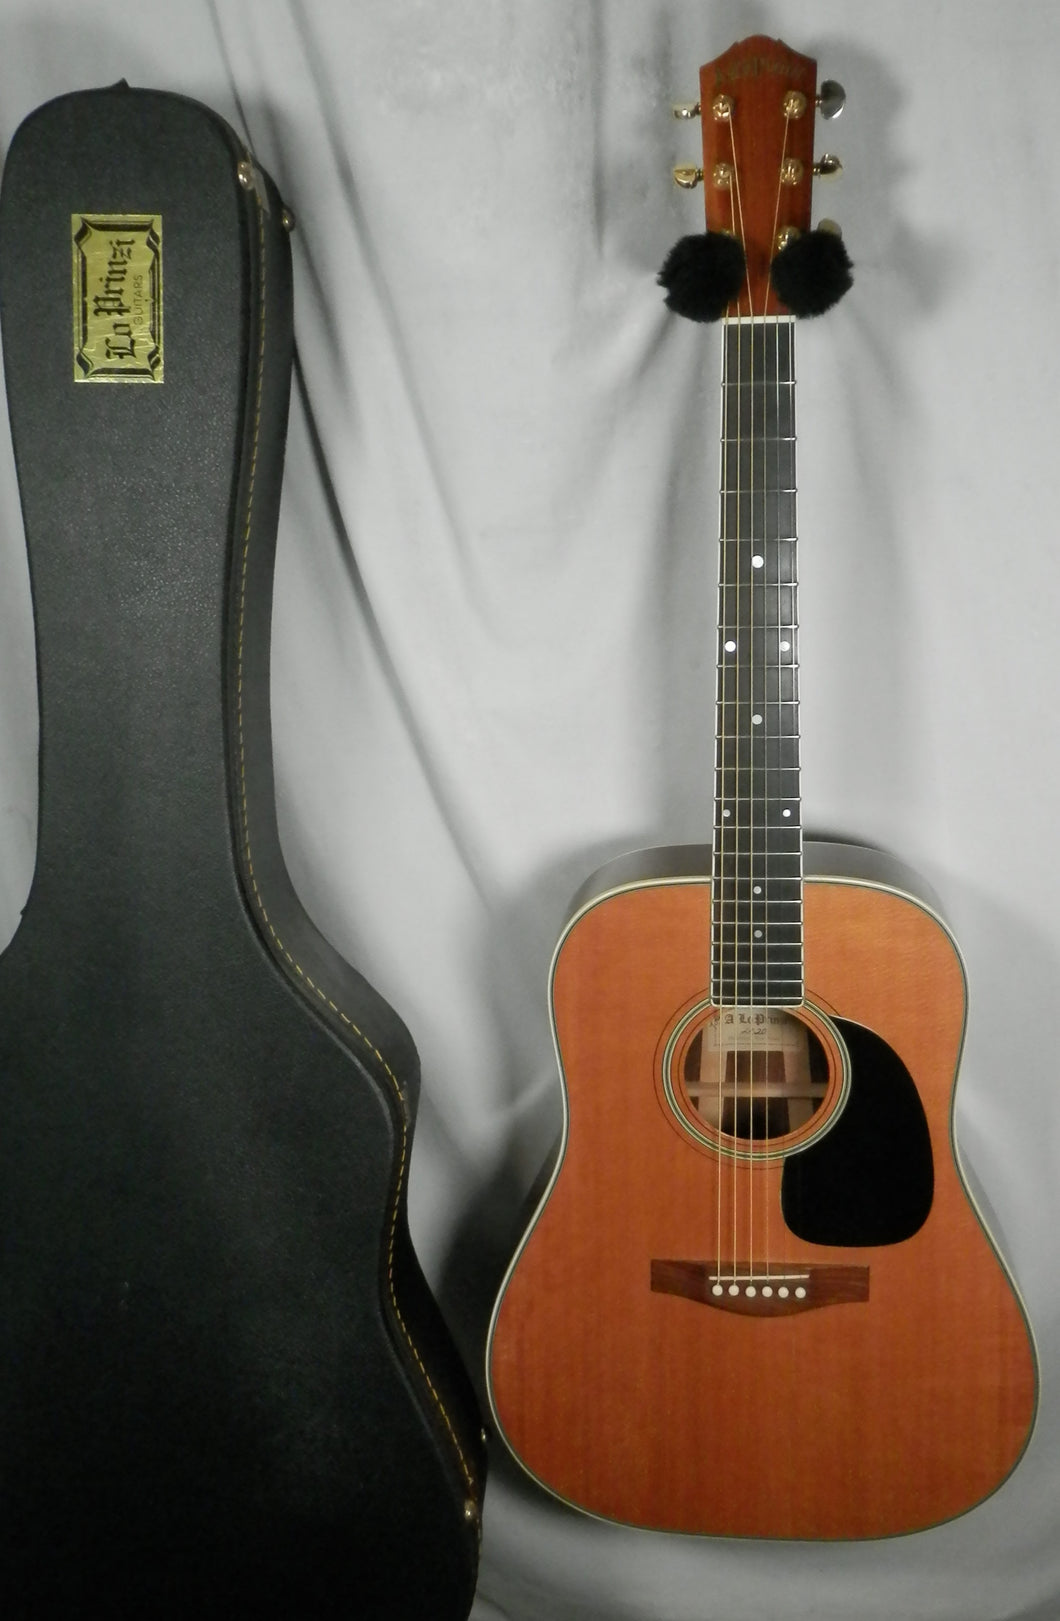 A LoPrinzi LR-20 Dreadnought Acoustic Guitar with case used